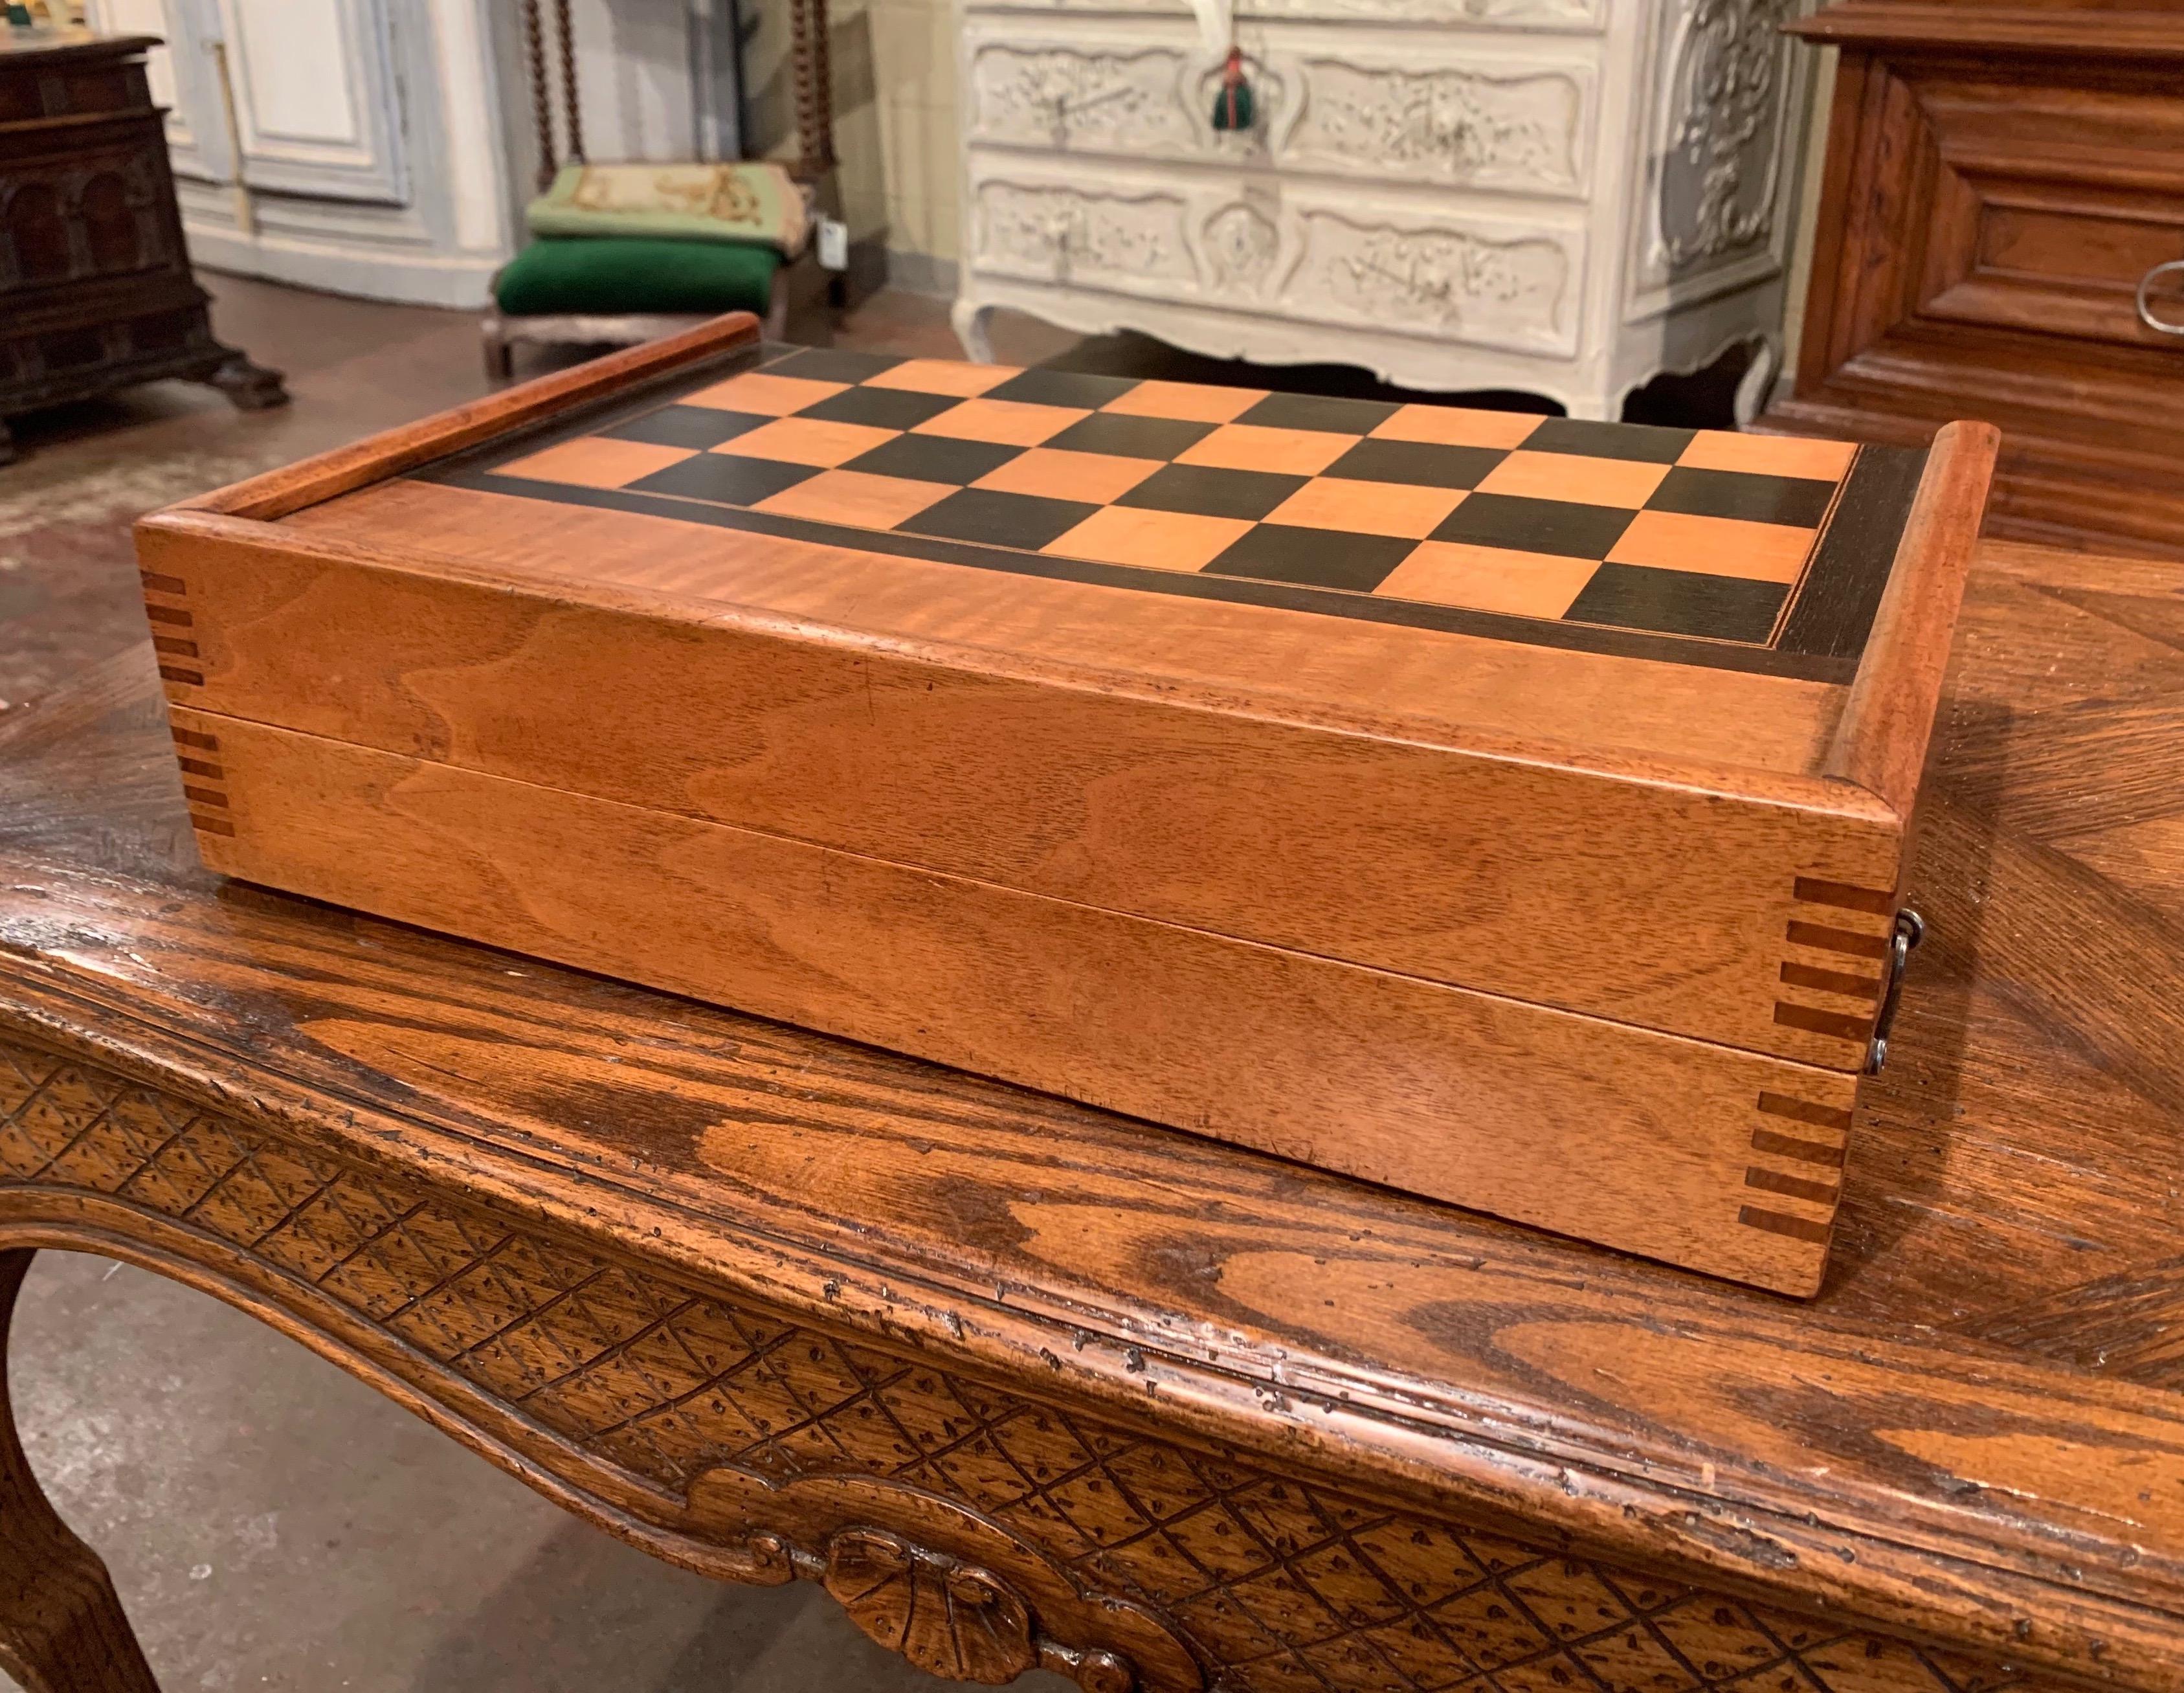 19th Century French Walnut Complete Backgammon or Checkers Board Game 4